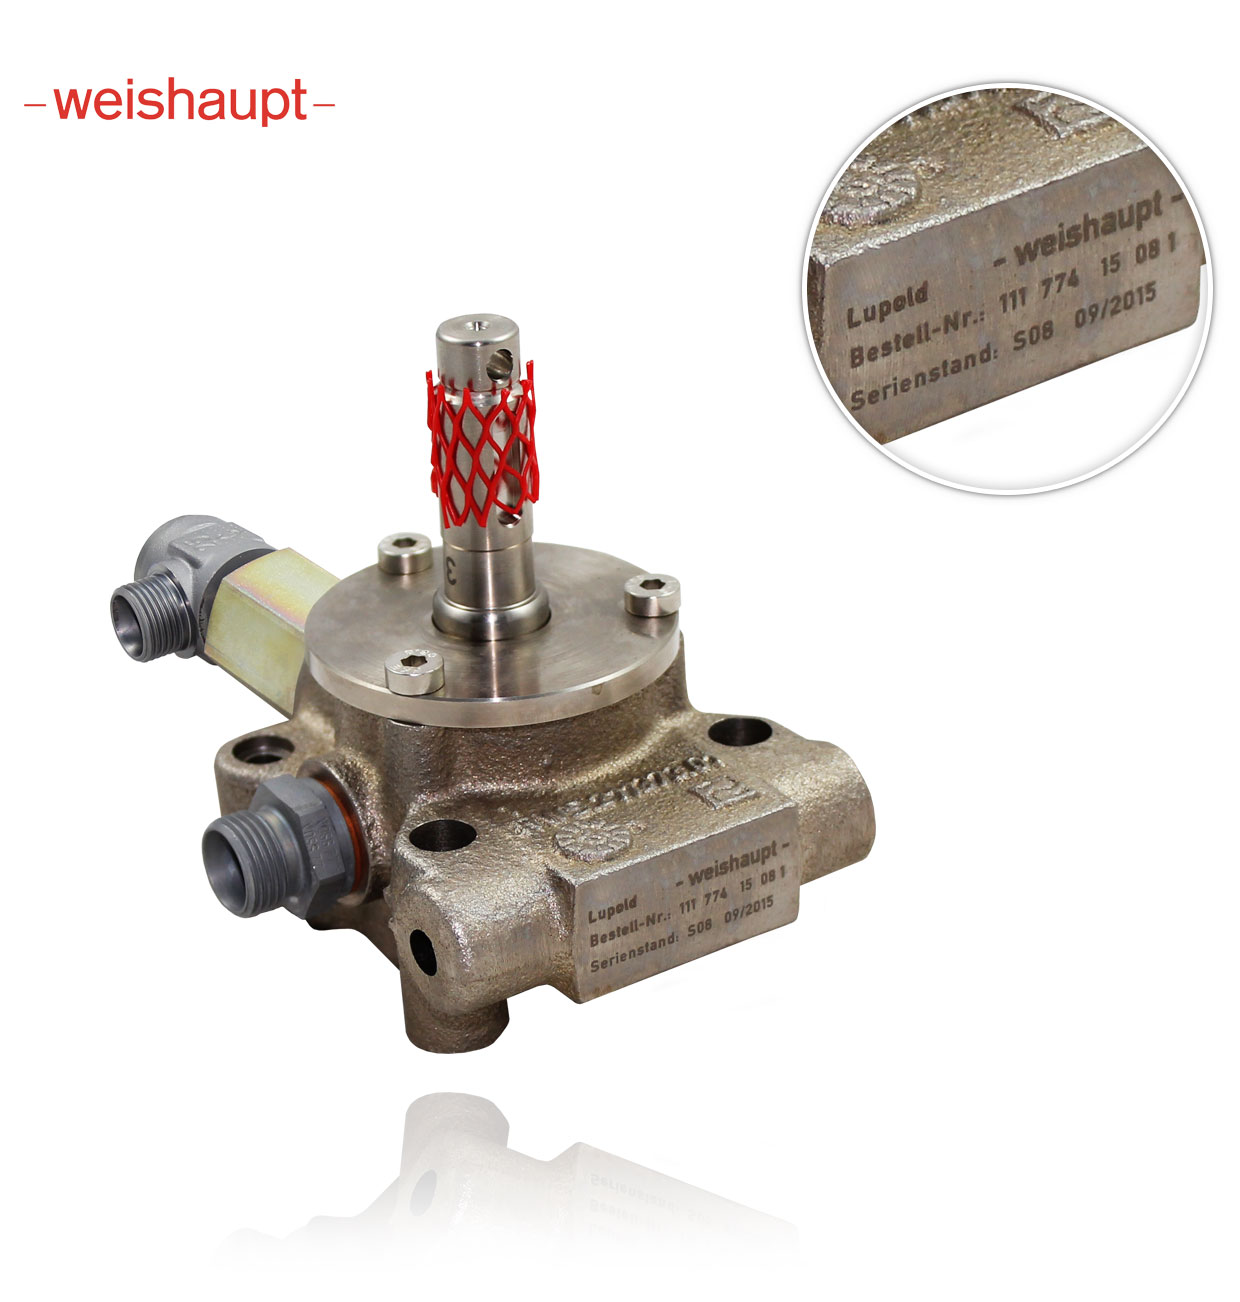 420KG/H  3/4" FLOW REGULATOR FOR RMS10/RMS11  WEISHAUPT 18117415042